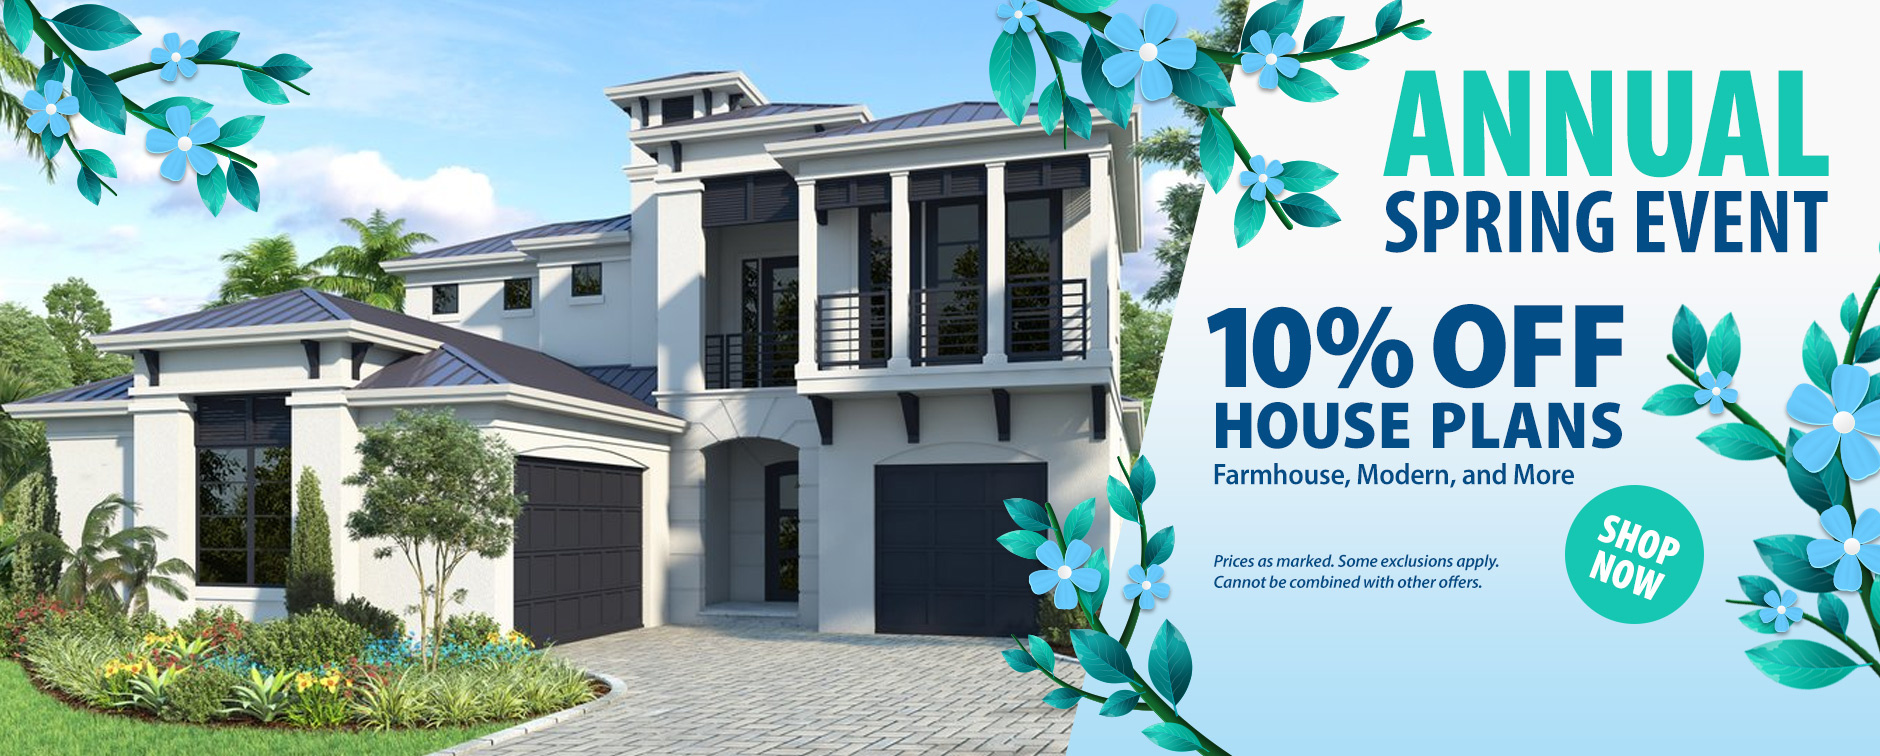 Shop Now and Get 10% Off Dream Home Plans